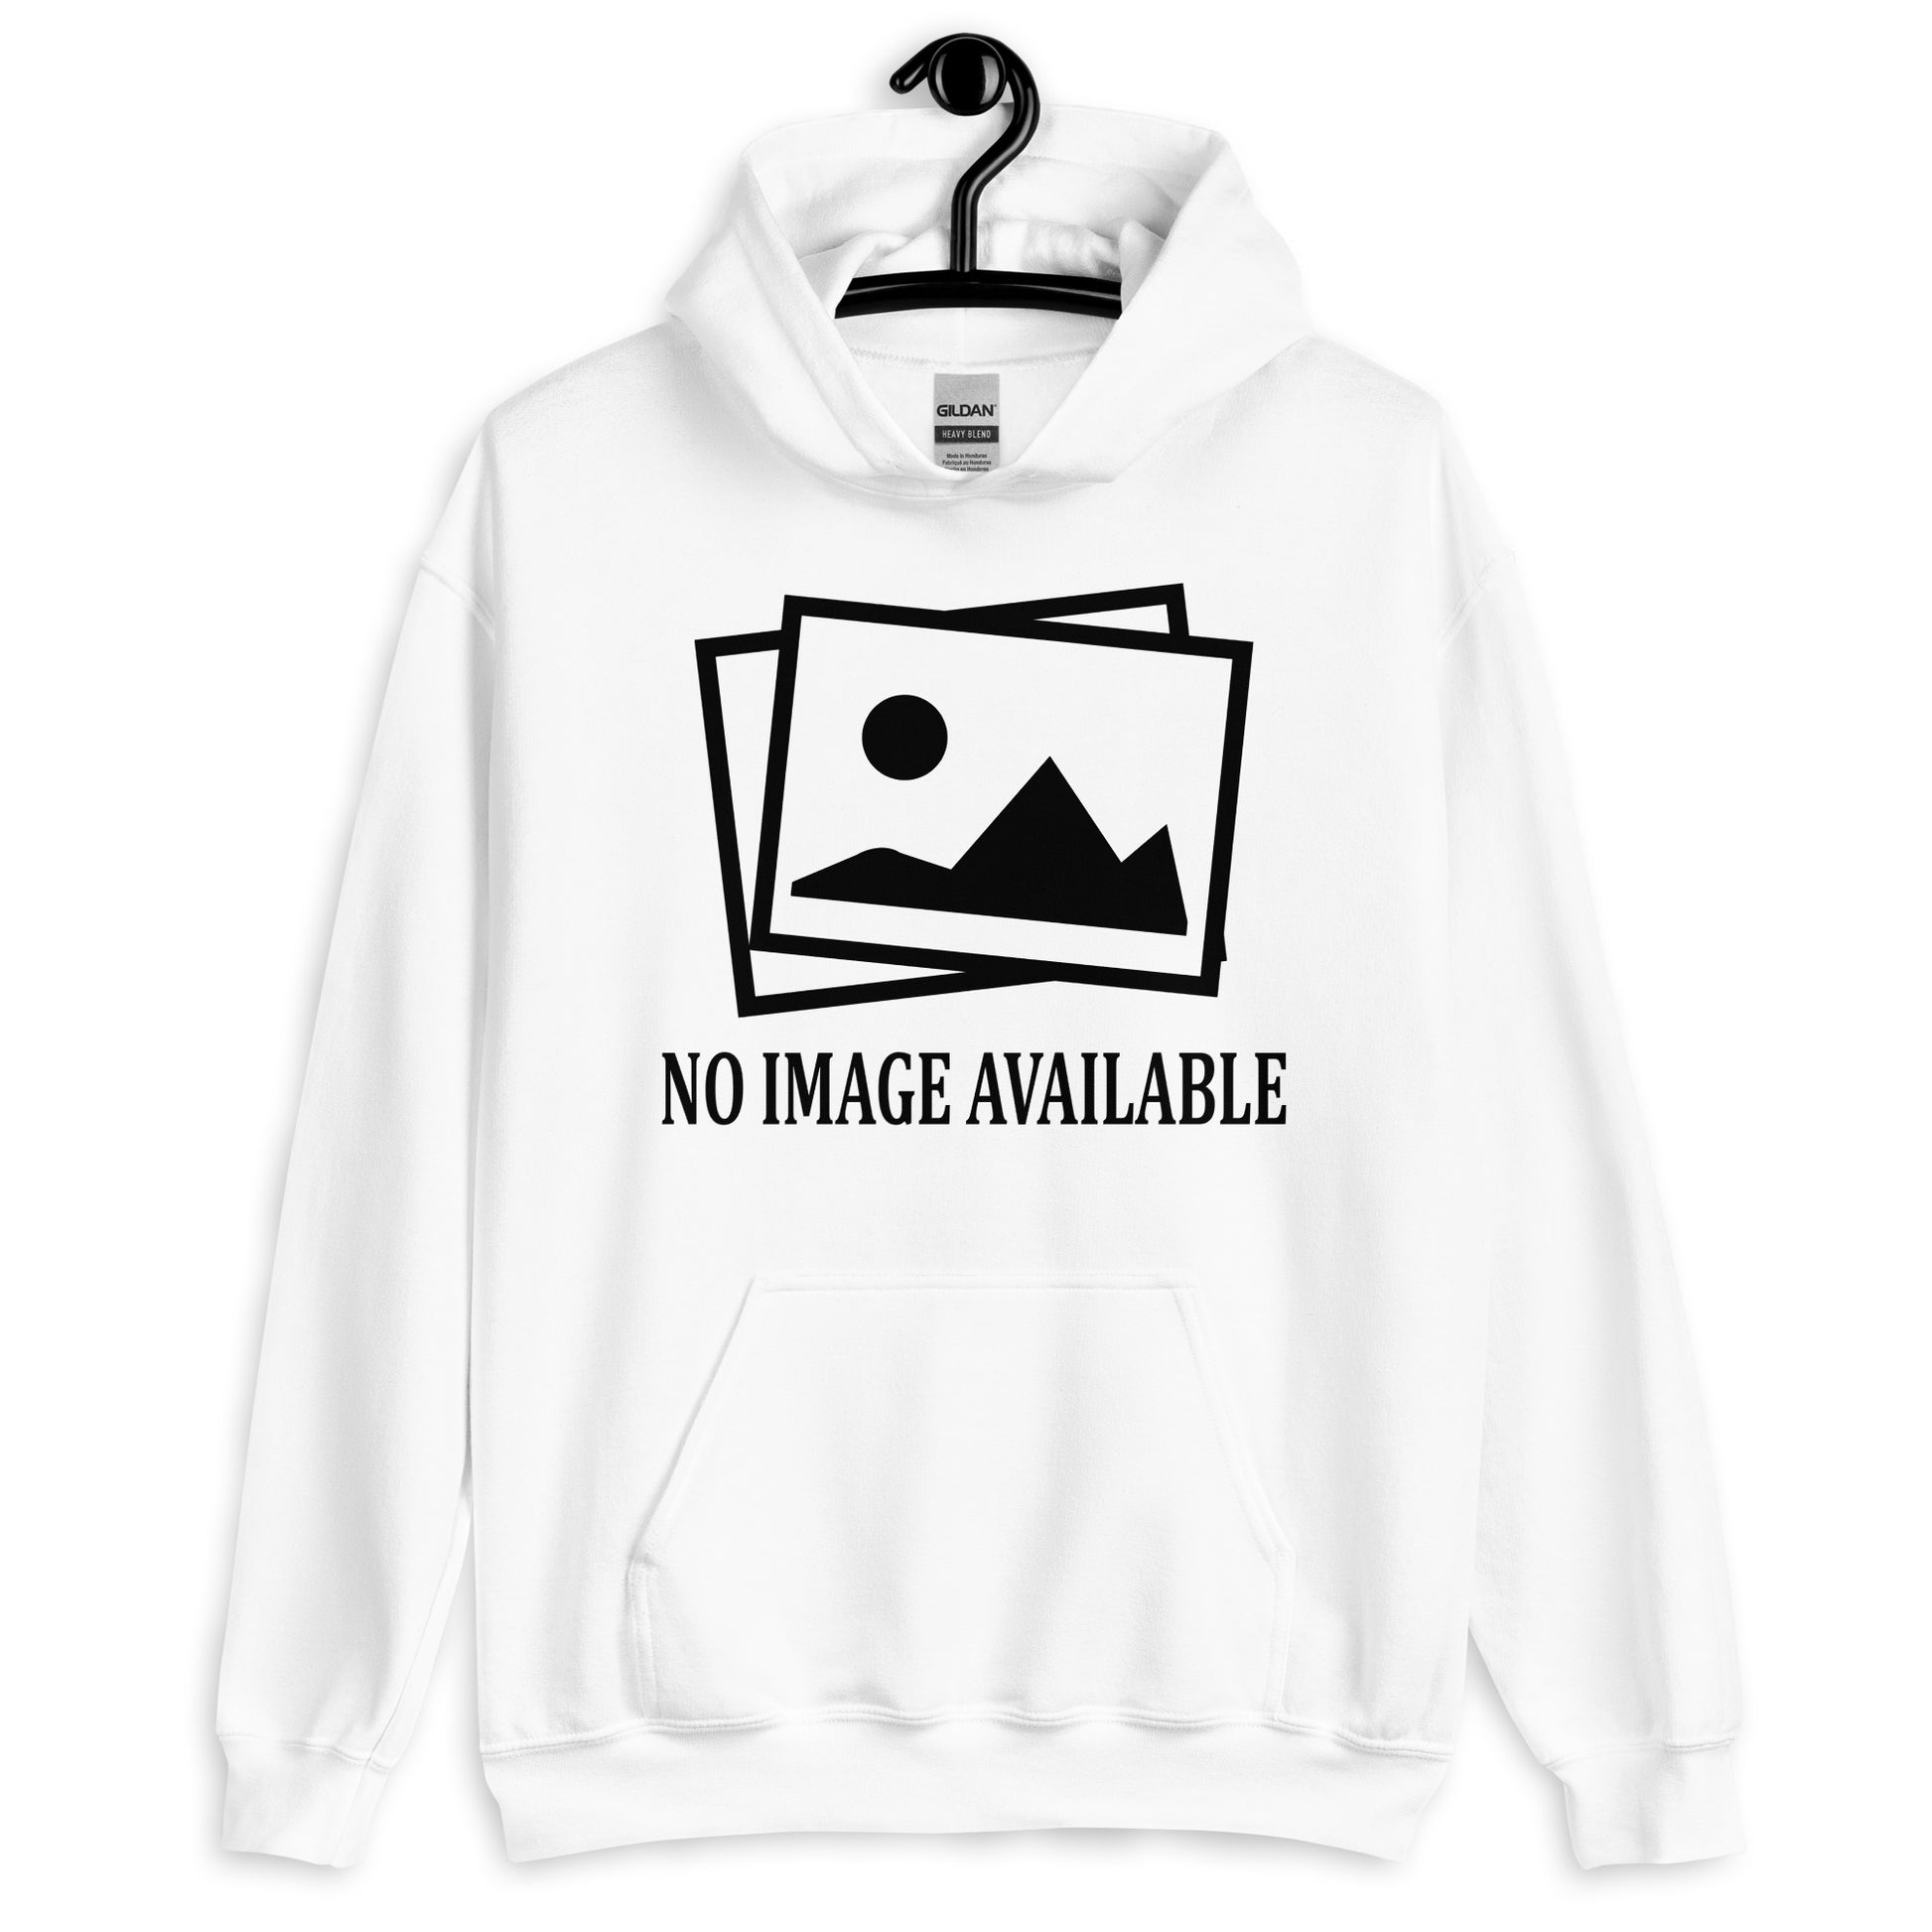 white hoodie with image and text "no image available"